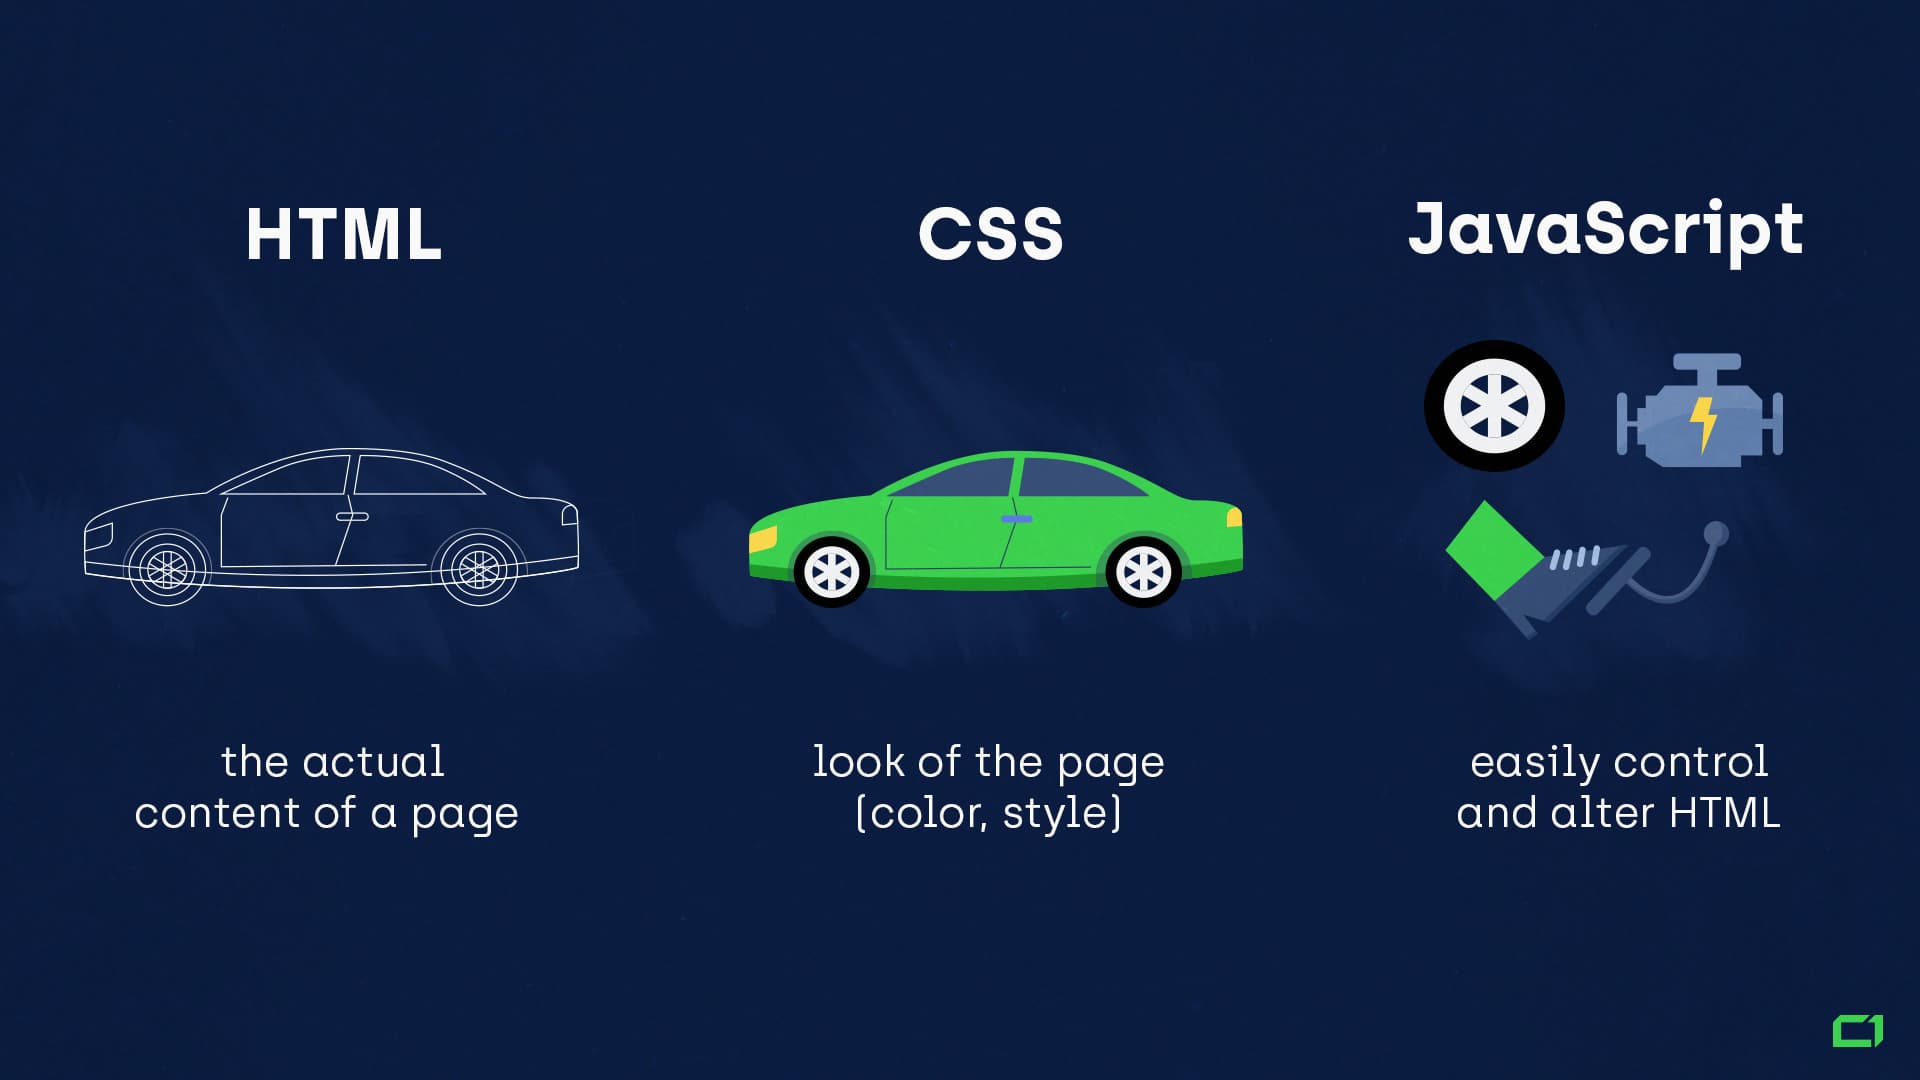 The differences between HTML, CSS and JavaScript: HTML is the actual contents of a page, CSS is responsible for the look of the page, and JavaScript controls and alters HTML.